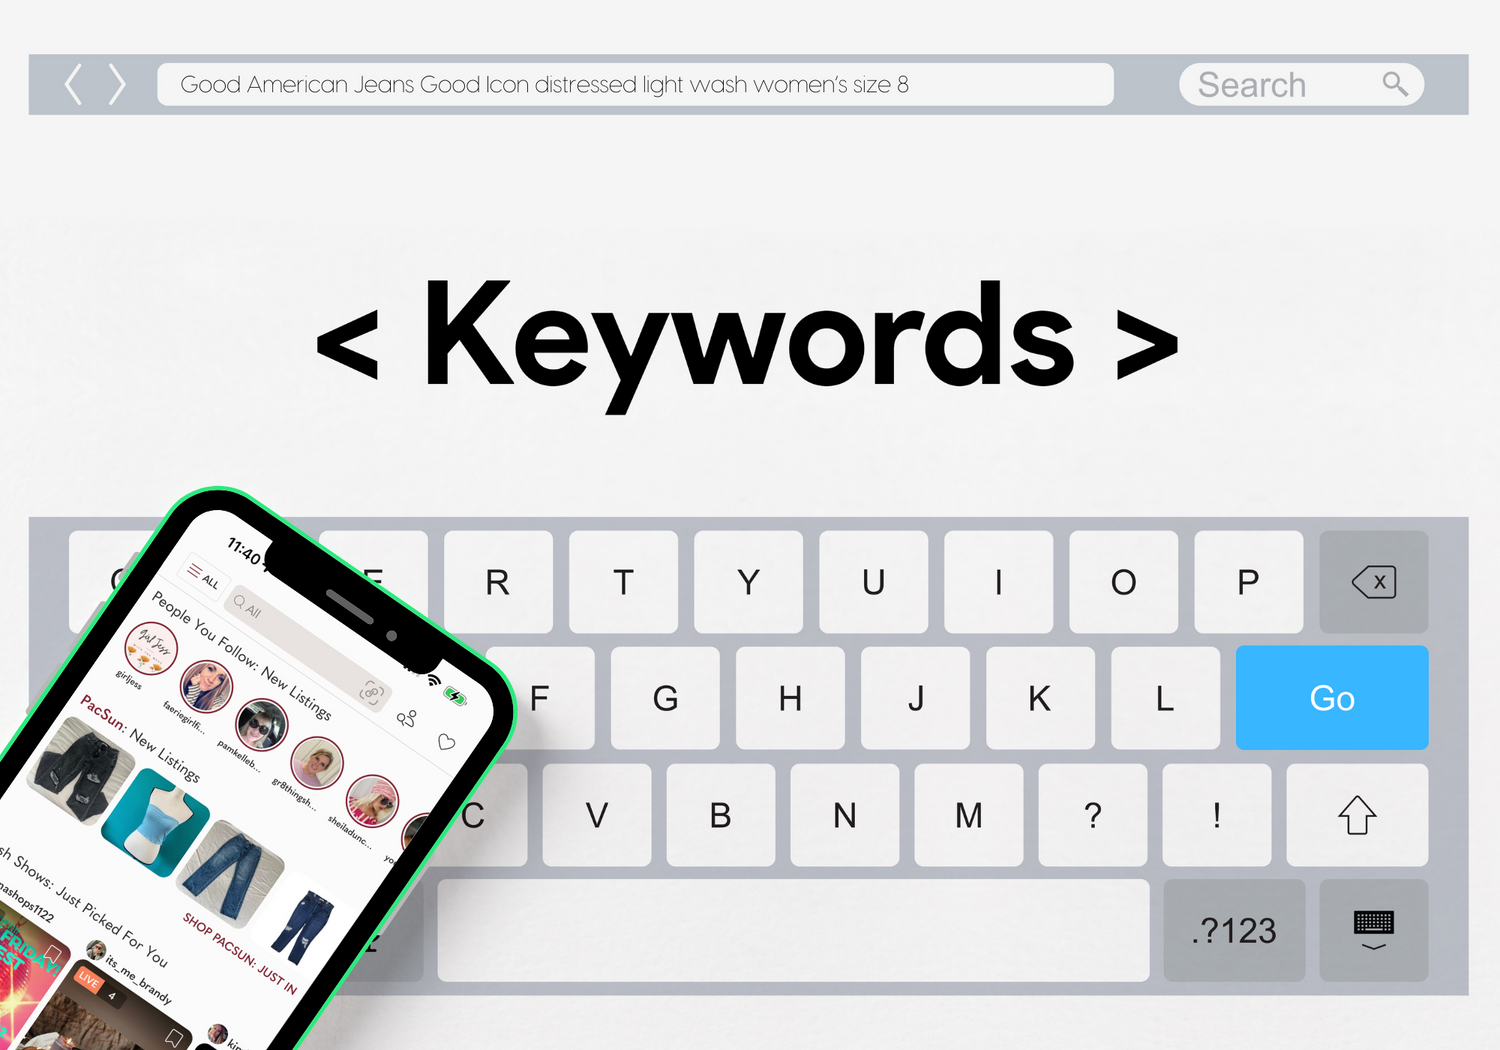 Keywords for resellers, how to use keywords on Poshmark & eBay